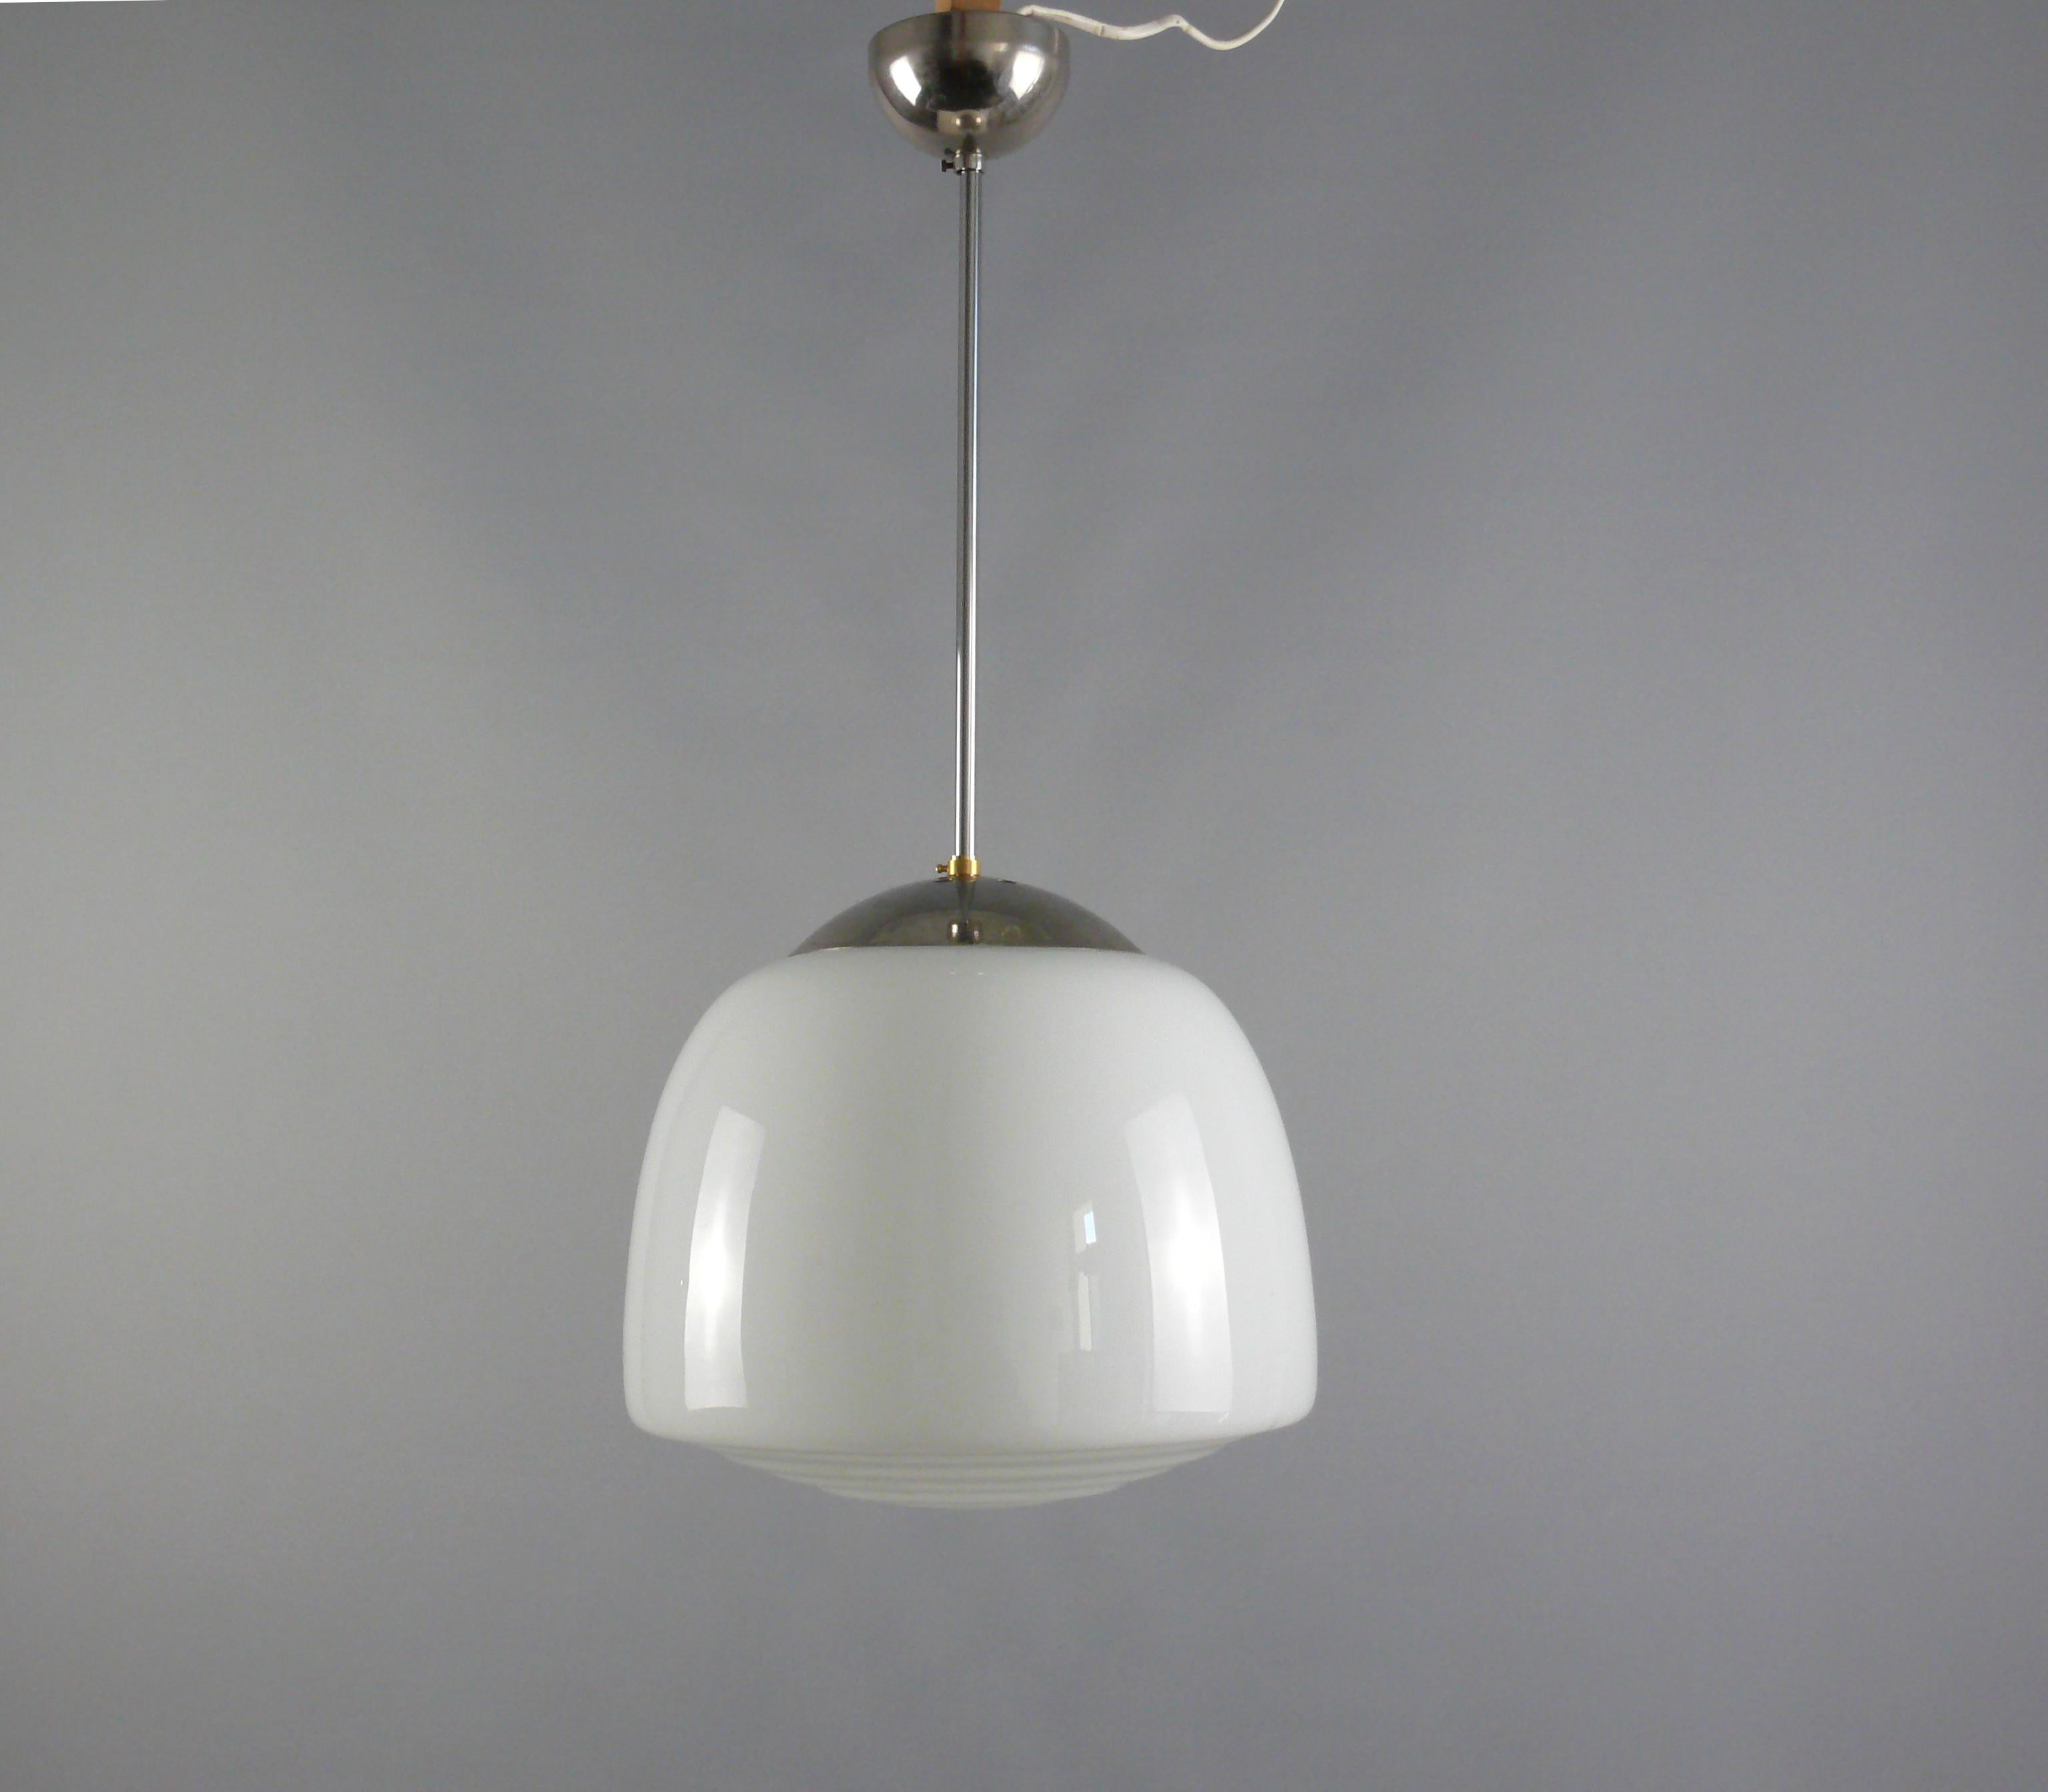 2 elegant Bauhaus pendant lights with chrome-plated/nickel-plated suspension and stepped, trapezoidal opal glass lampshade. The lamps date from the first half of the 20th century. The two identical opal glass shades are in good condition. The